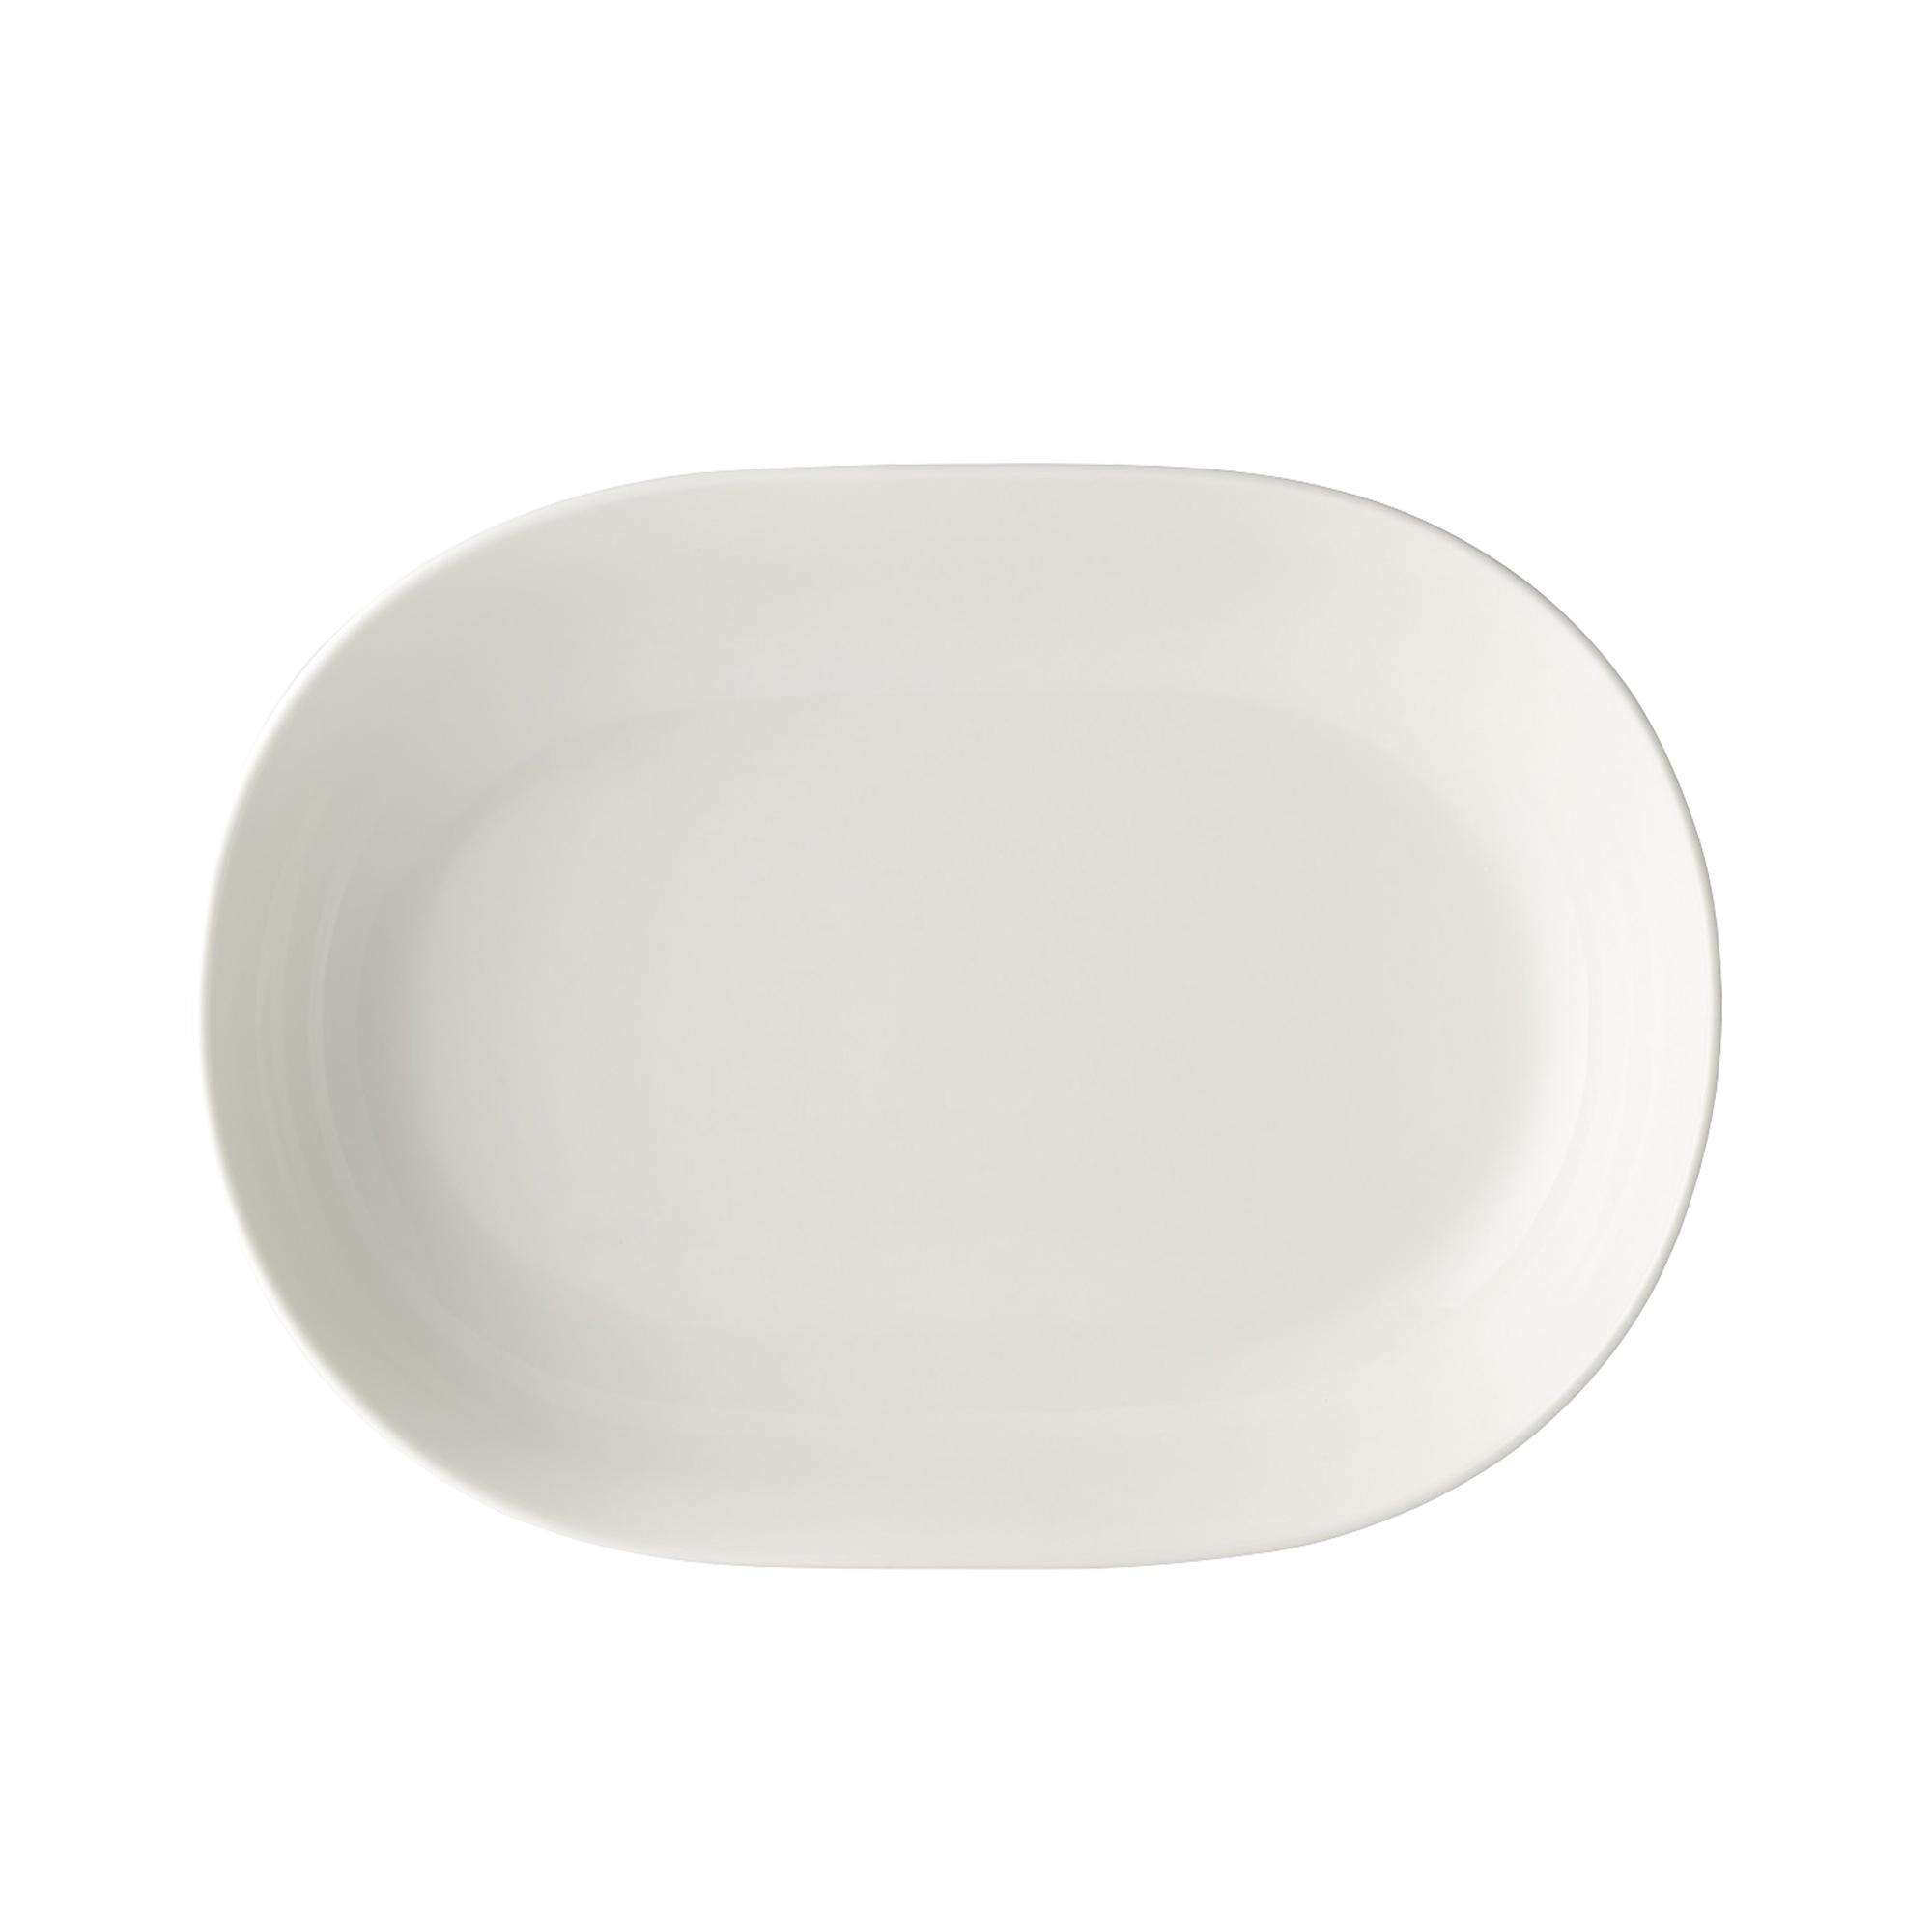 Noritake Everyday by Adam Liaw Oblong Serving Bowl 24cm White Image 5